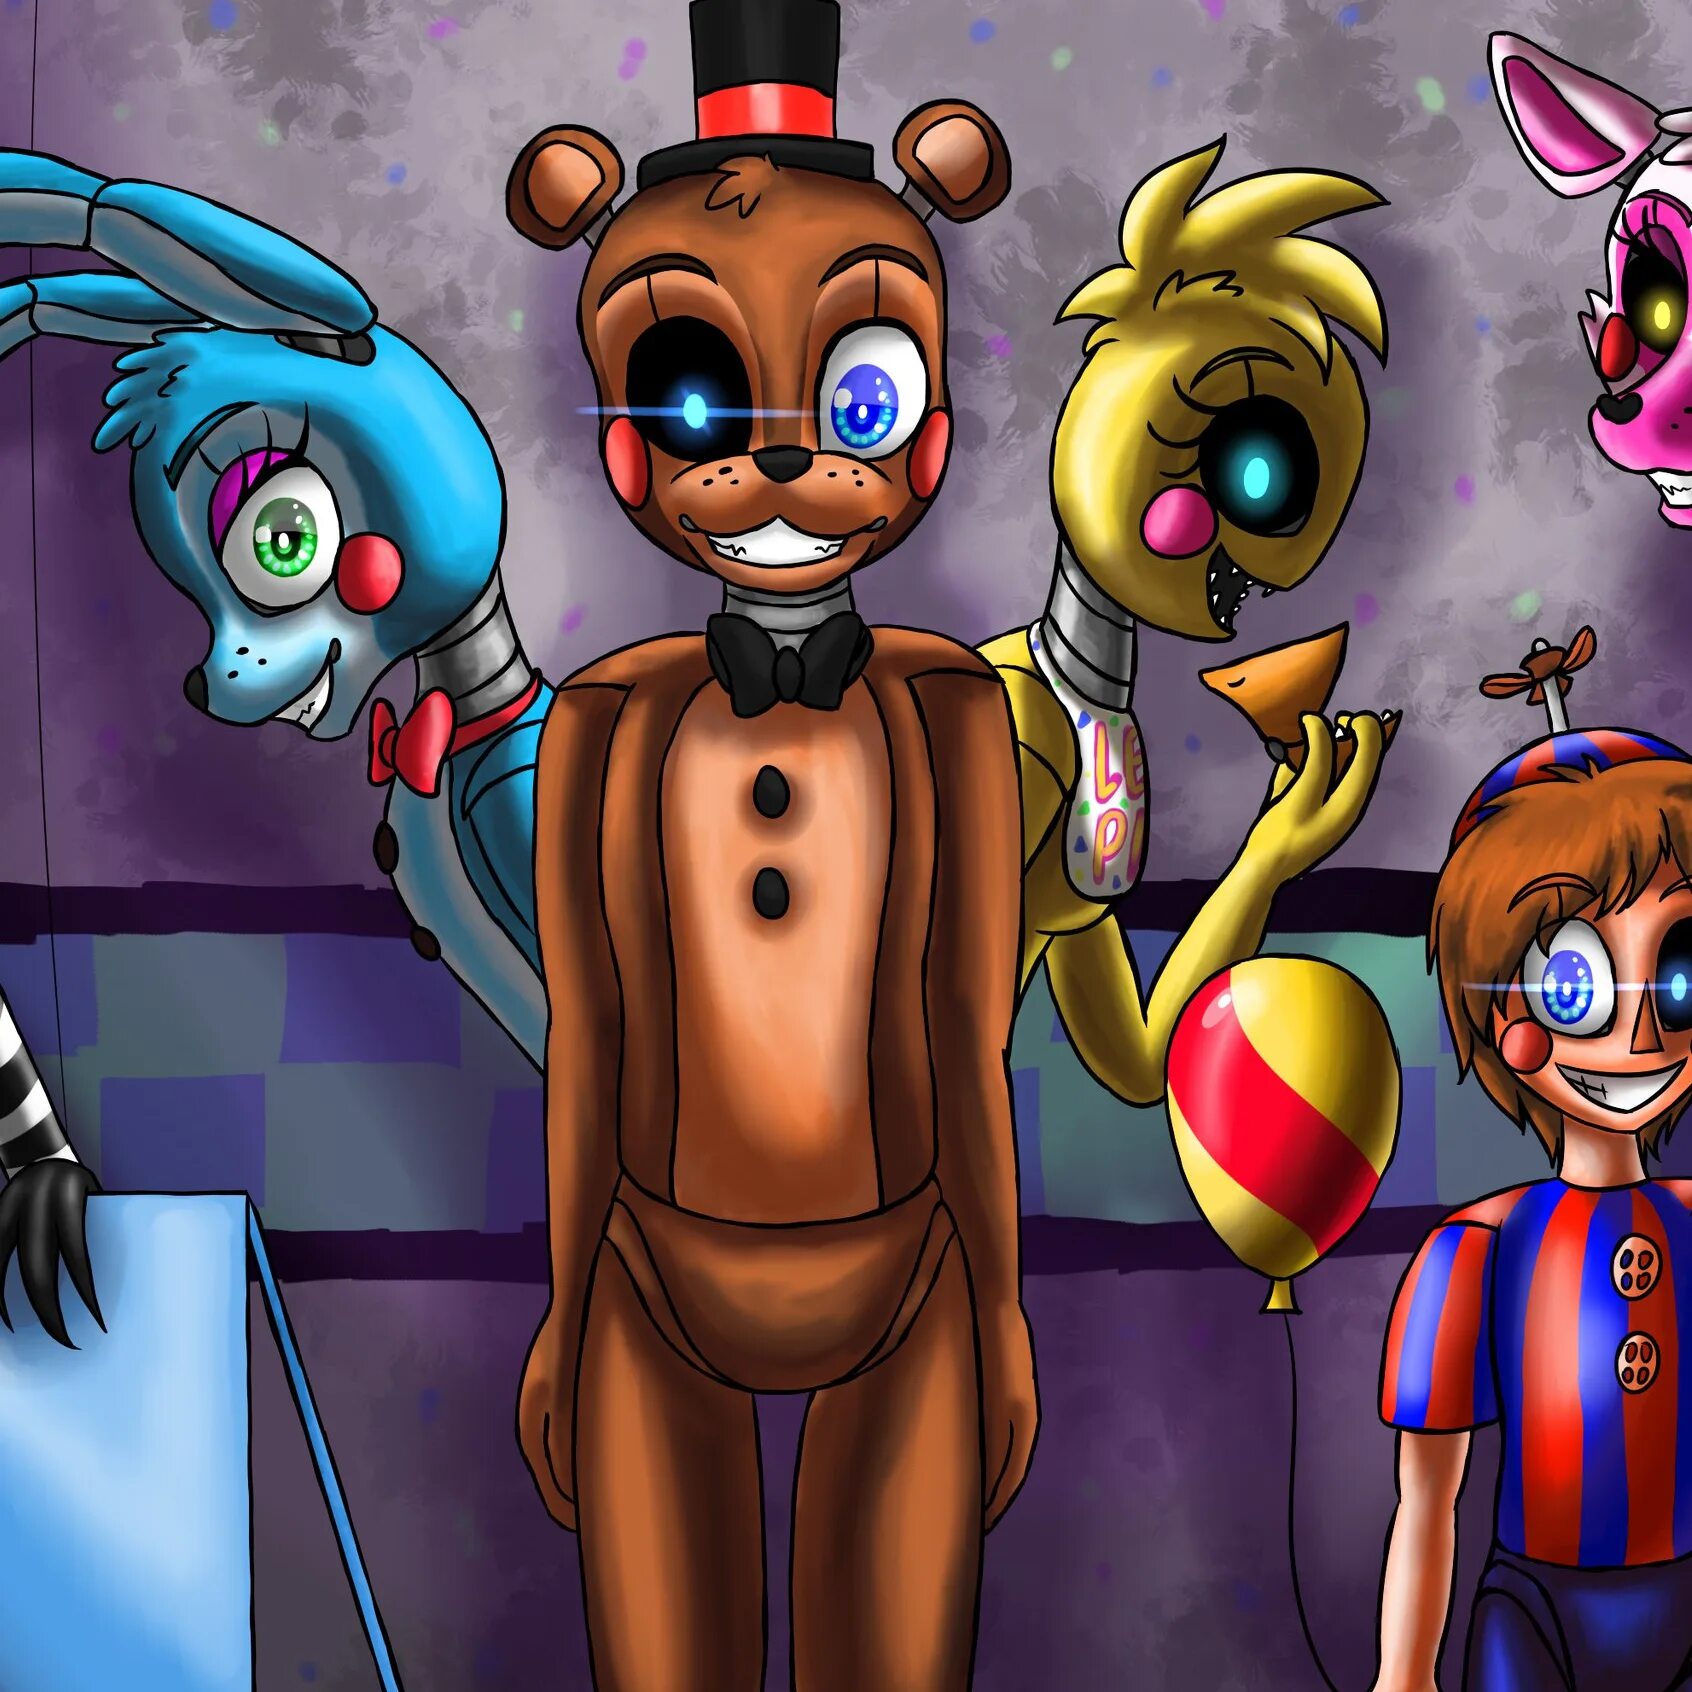 Five Nights at Freddy’s. АНИМАТРОНИКИ. АНИМАТРОНИКИ мультяшка. Какой фнаф 2